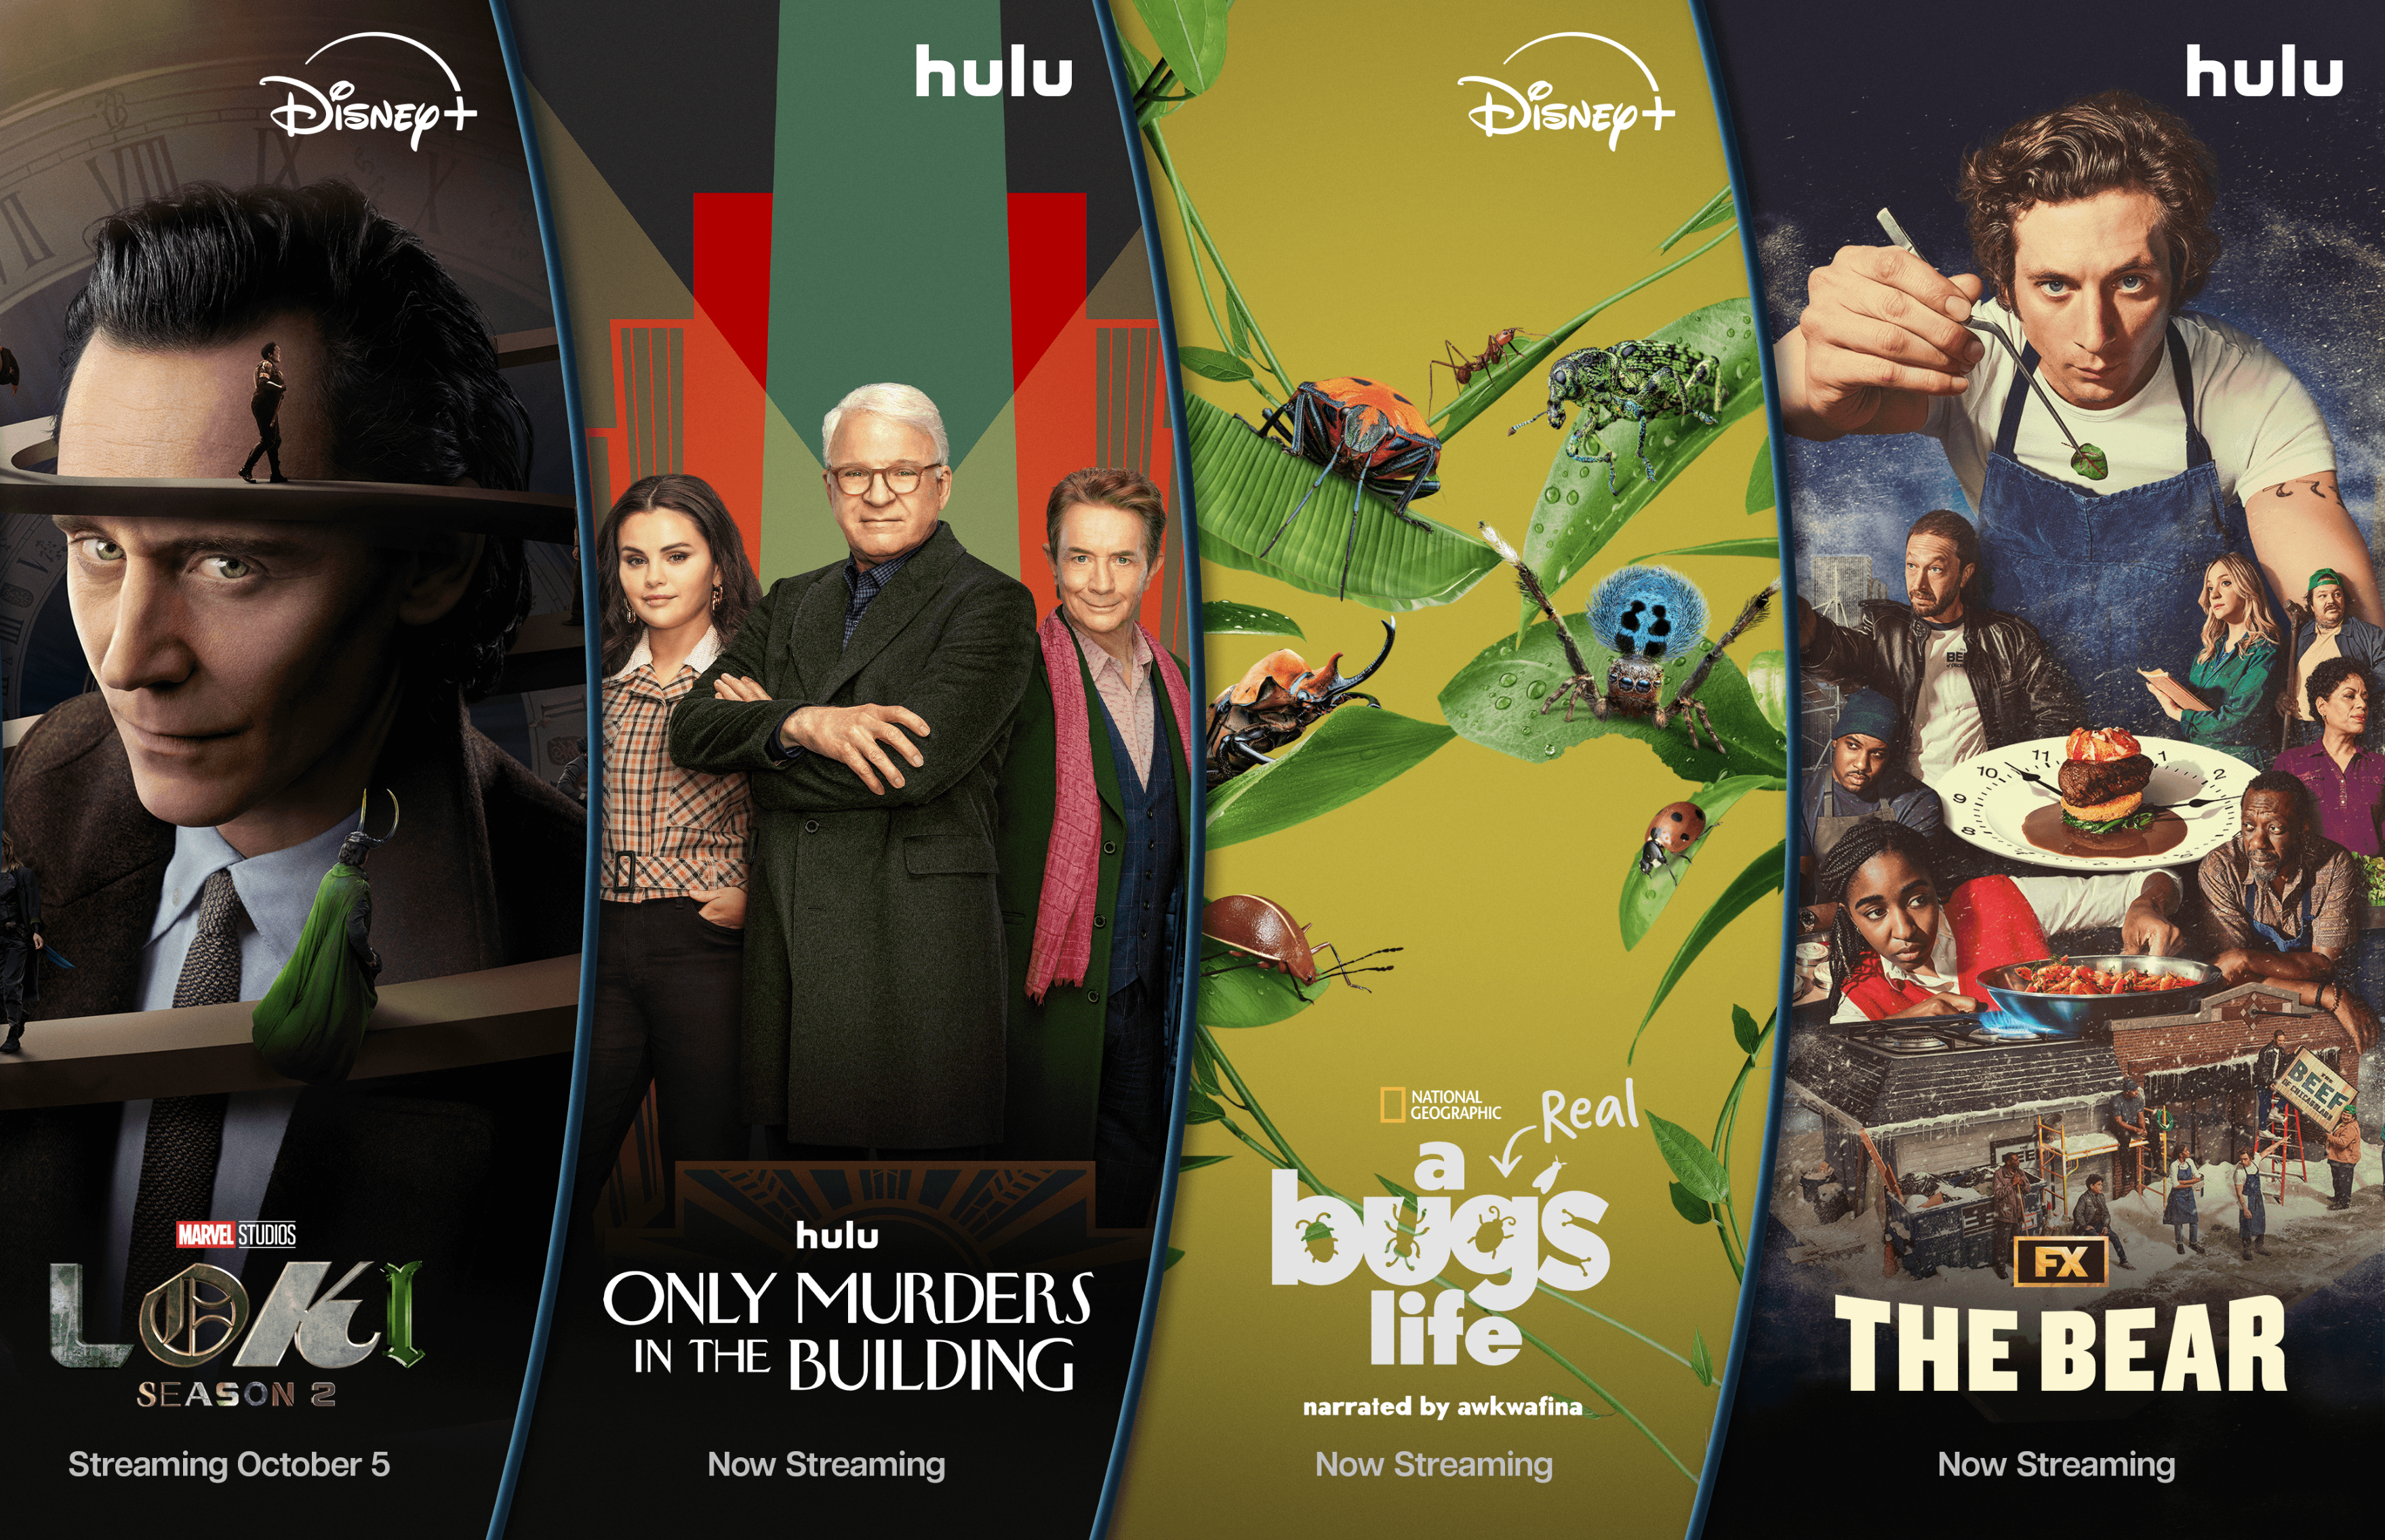 Promo collage for Disney+ and Hulu shows including &#x27;Loki&#x27;, &#x27;Only Murders in the Building&#x27;, &#x27;A Bug&#x27;s Life&#x27;, and &#x27;The Bear&#x27;